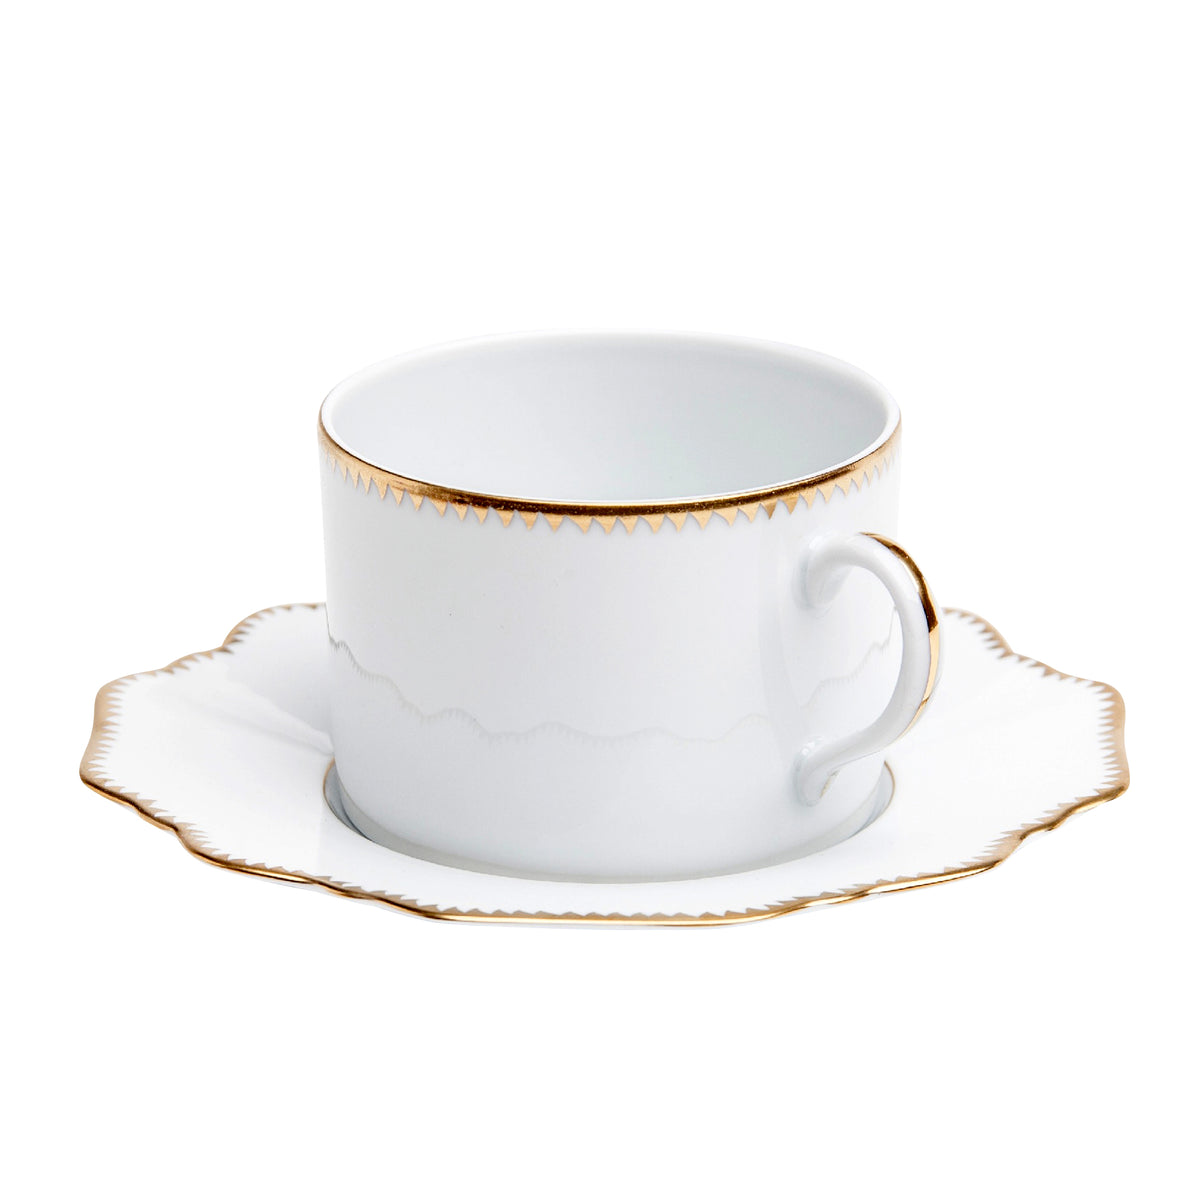 Simply Anna Antique Tea Cup and Saucer